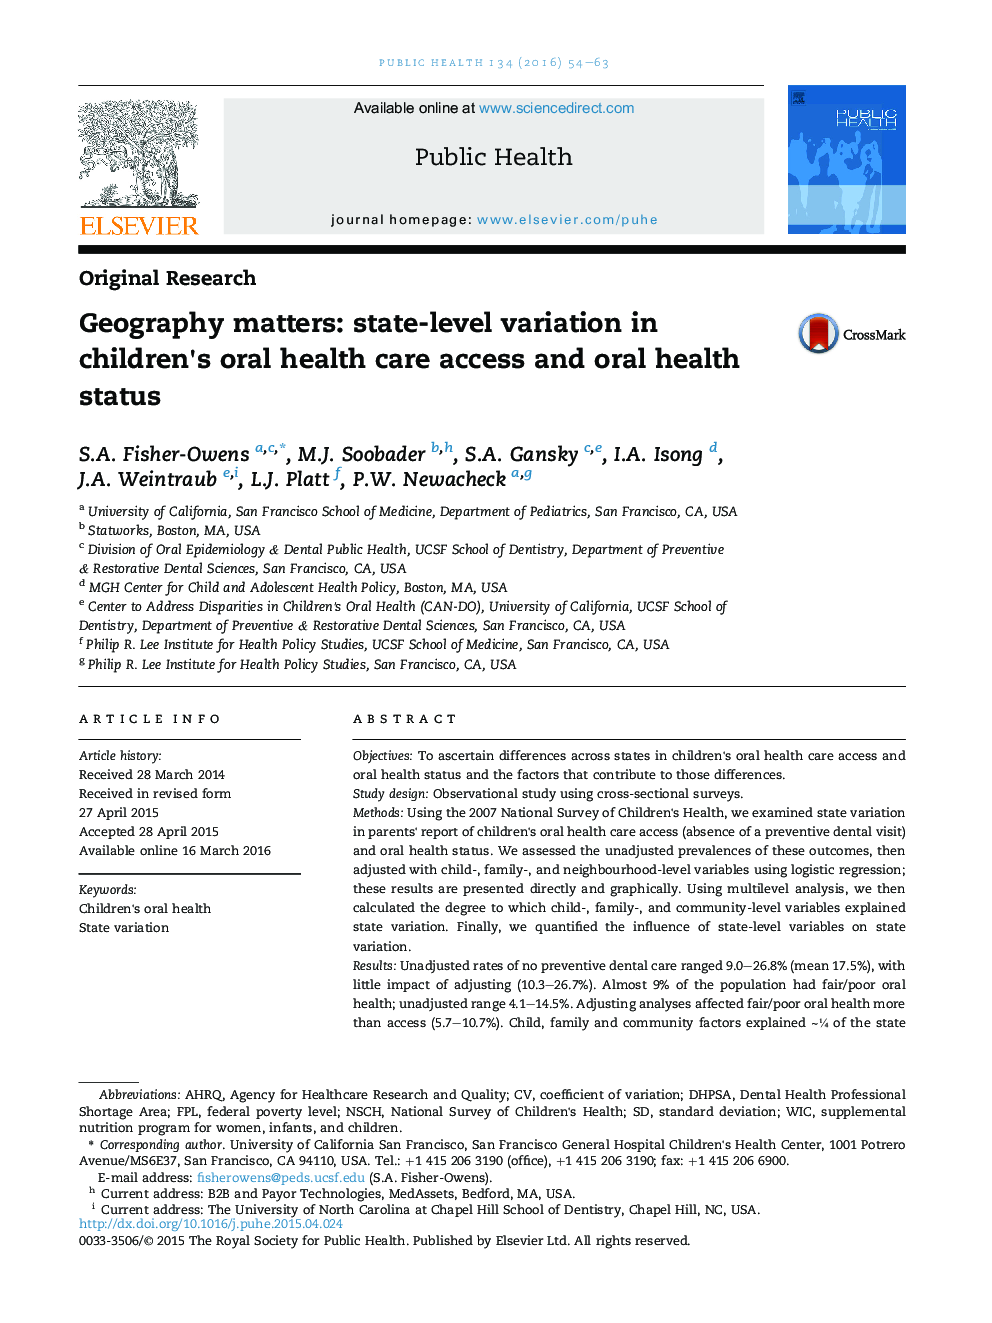 Geography matters: state-level variation in children's oral health care access and oral health status